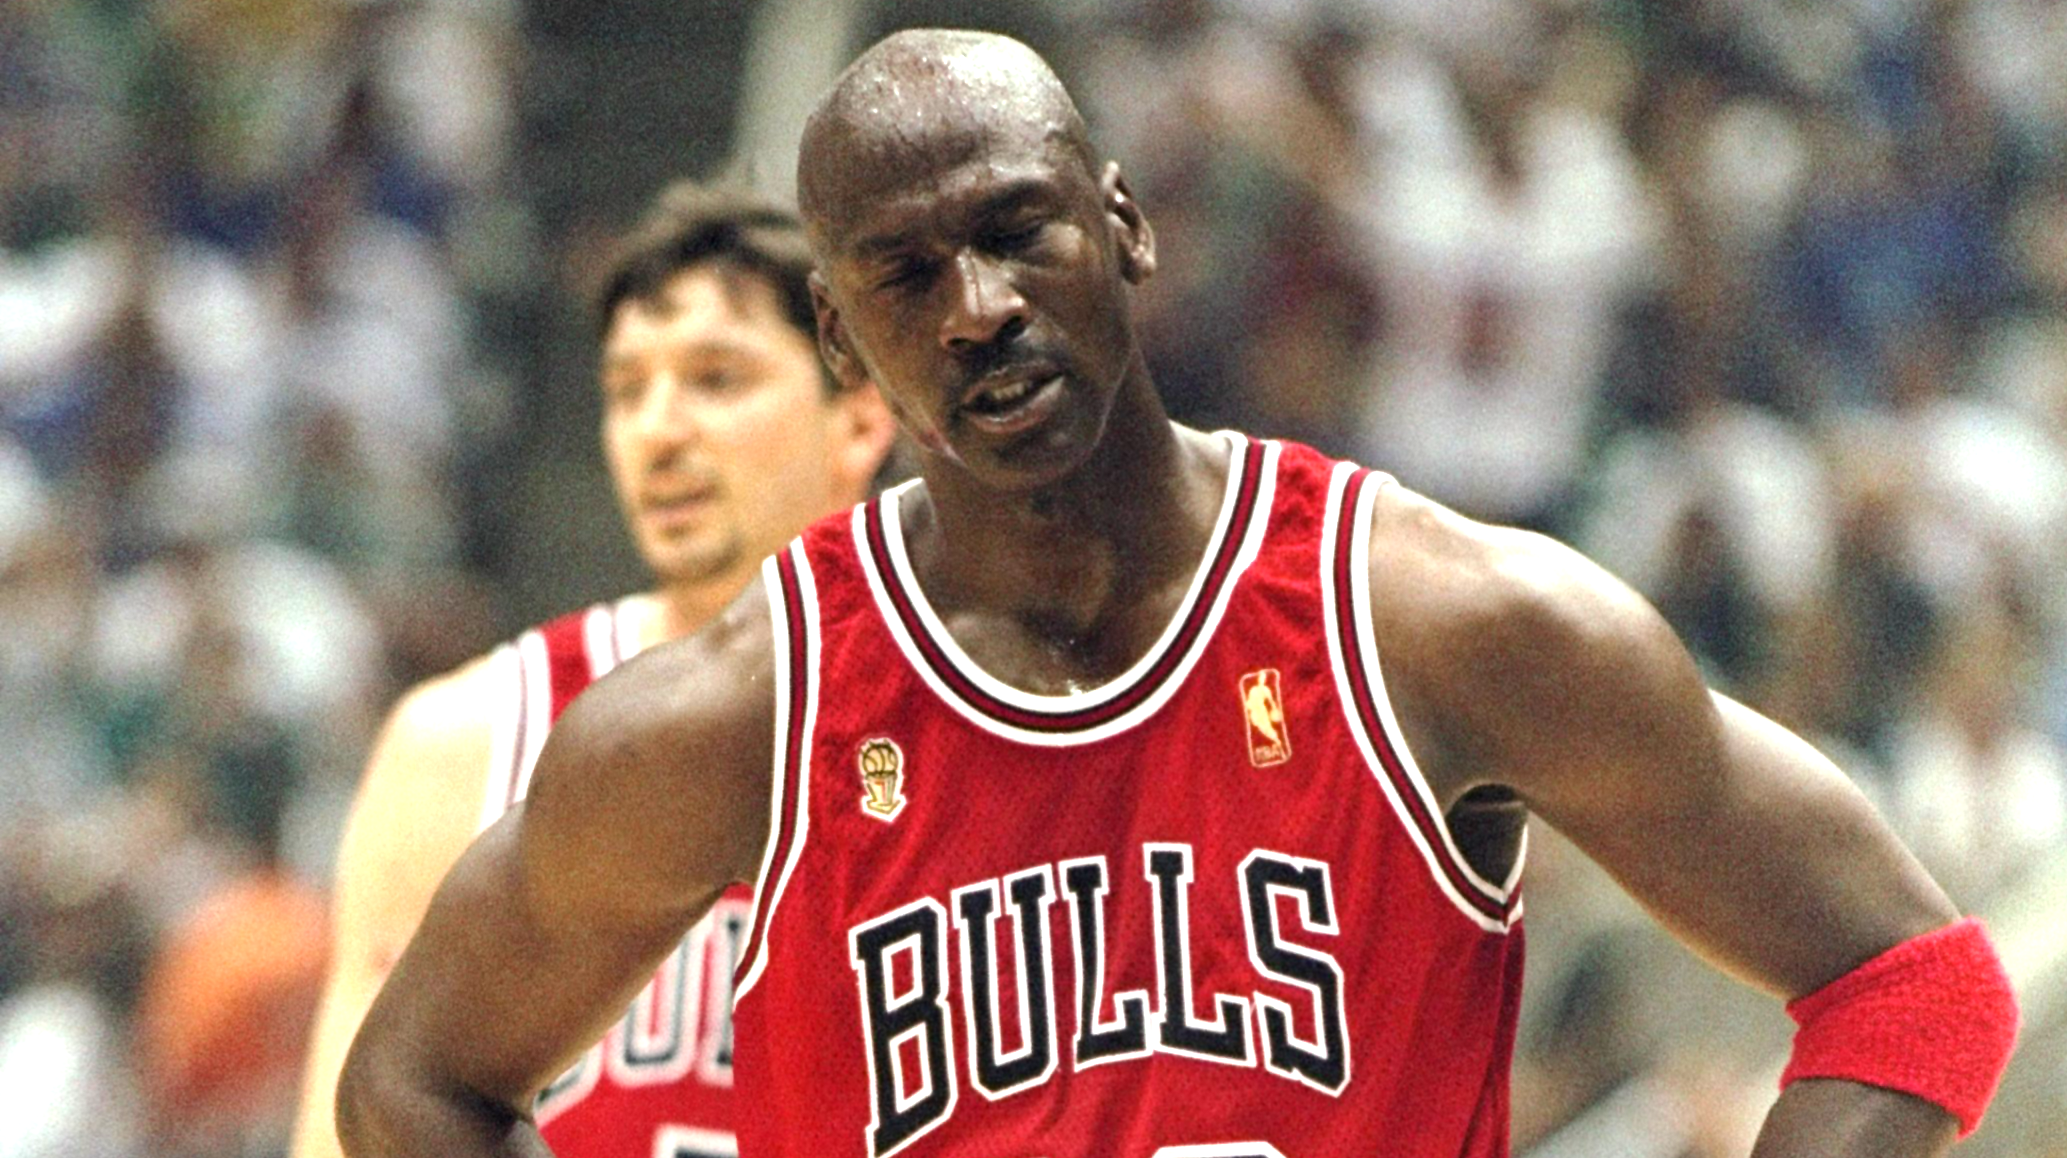 Pippen thinks MJ's Flu Game wasn't that impressive - Basketball Network -  Your daily dose of basketball